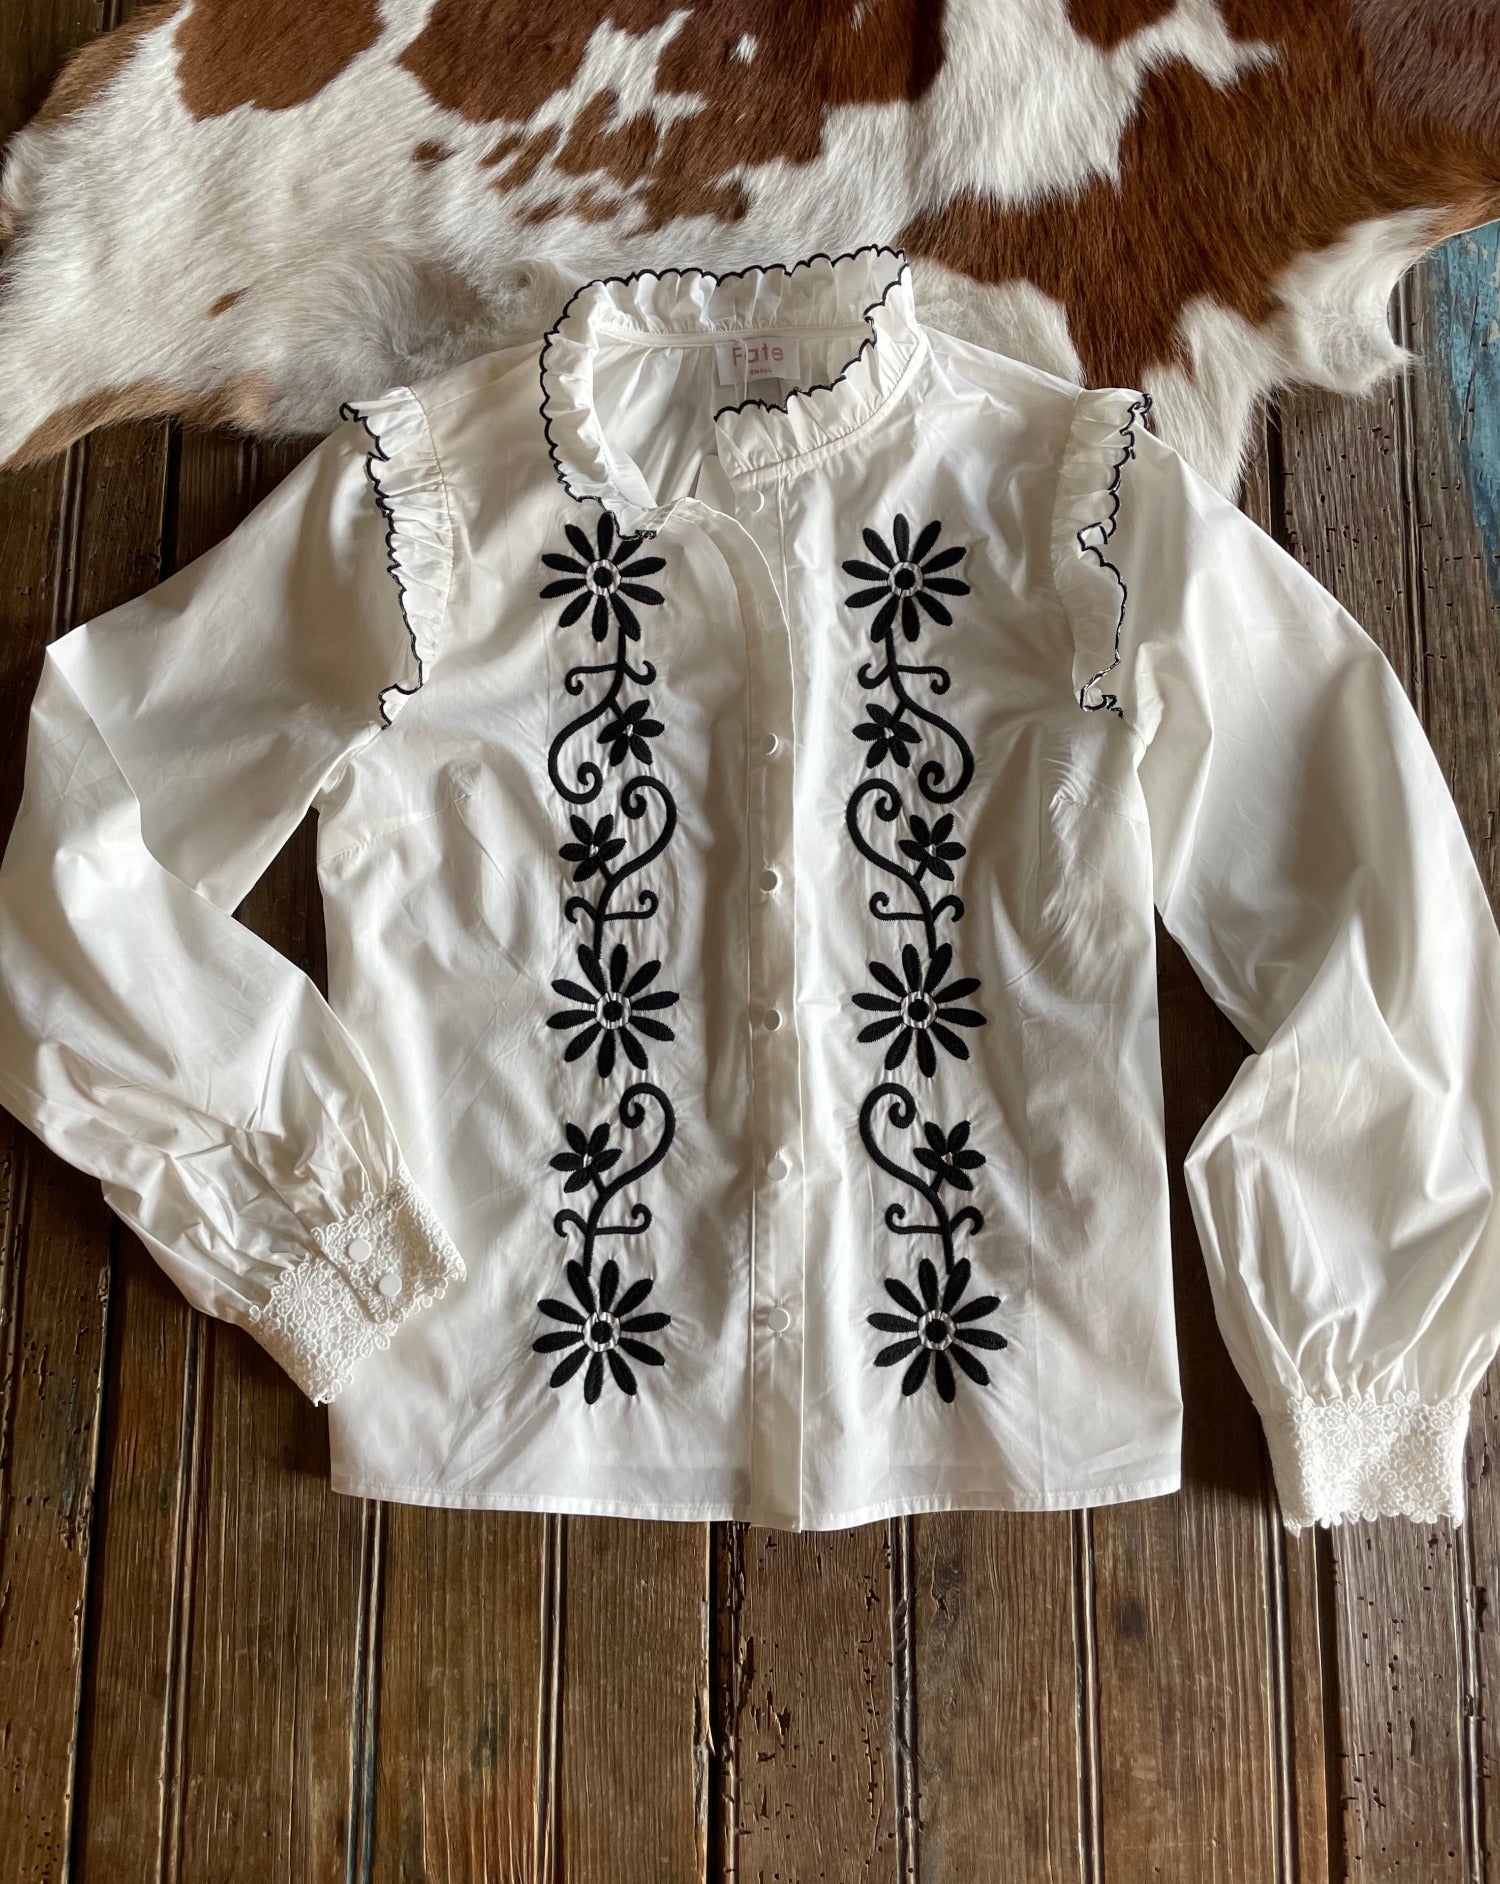 Flat lay of white blouse with black embroidery and ruffle detail